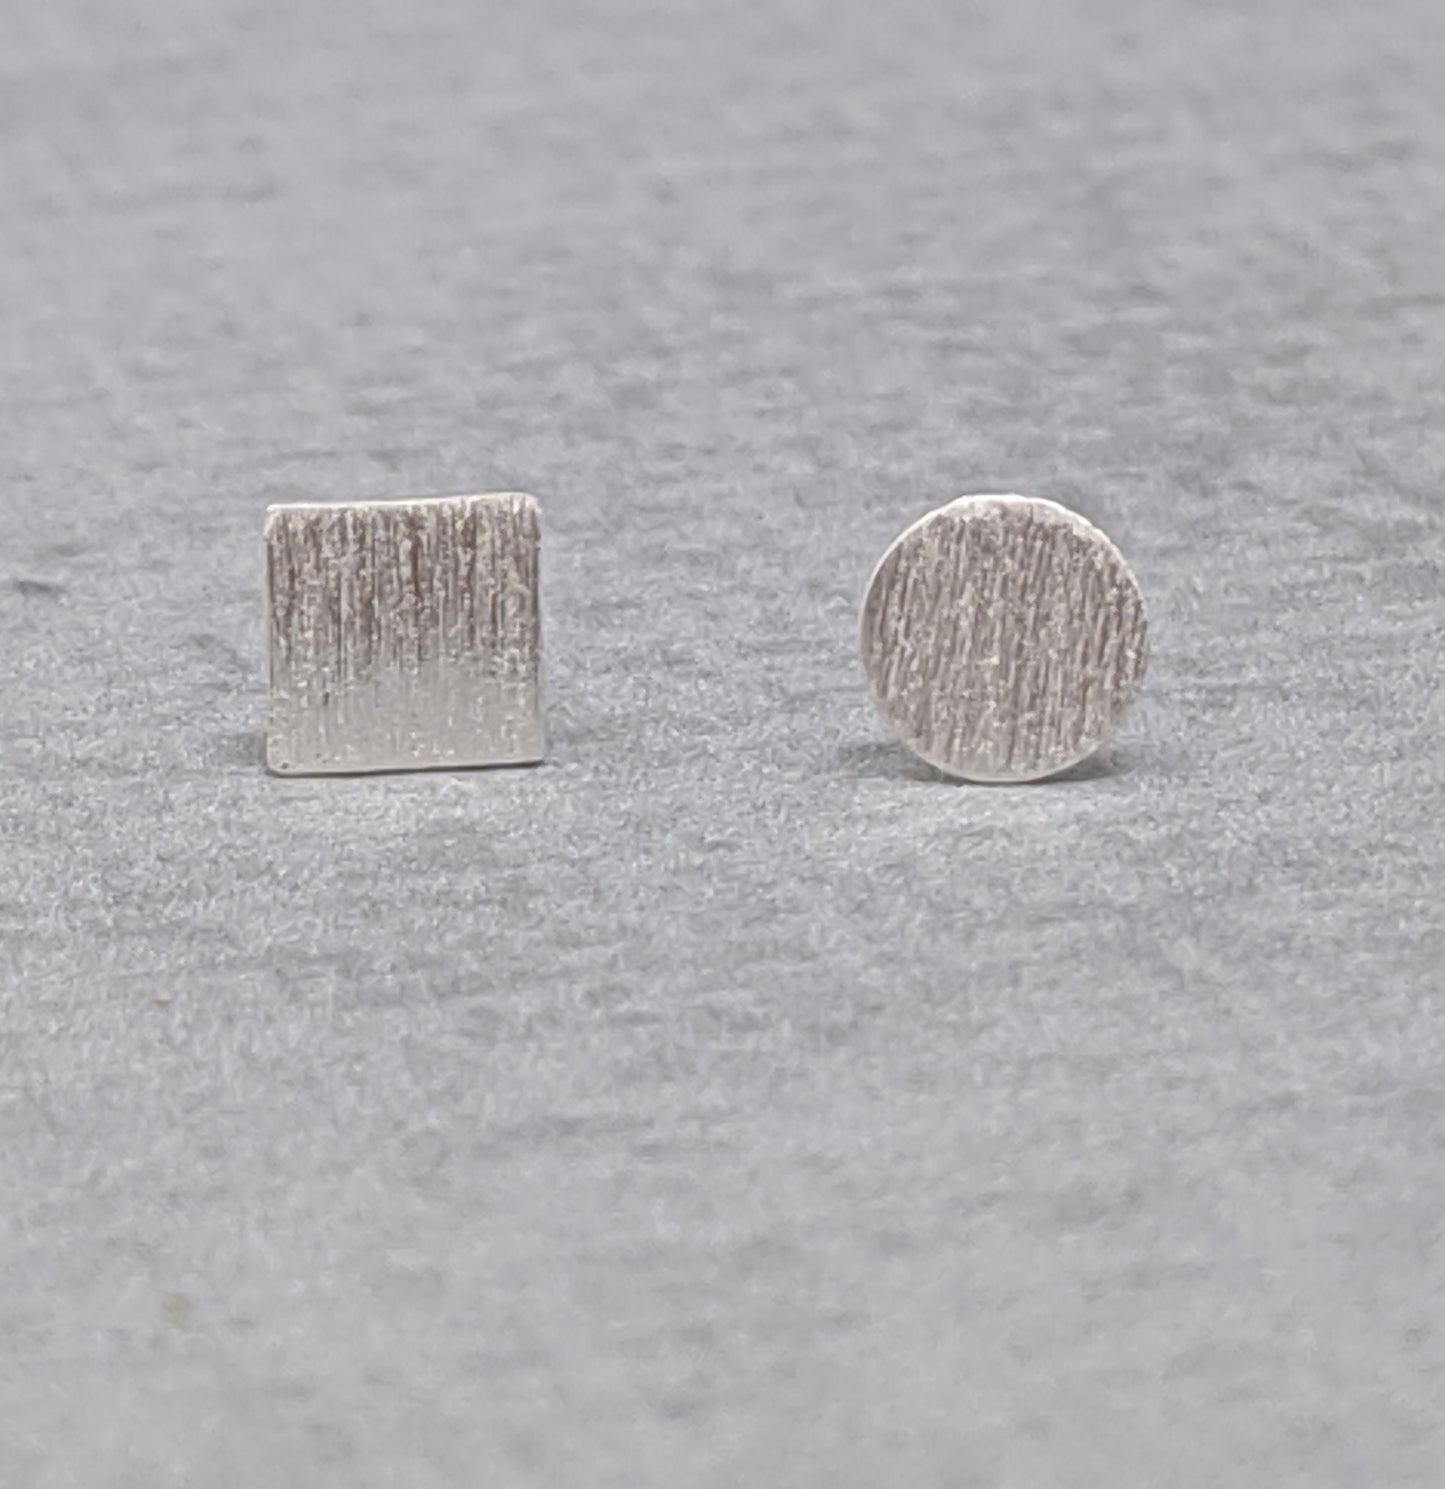 Mismatched square and round sterling silver studs with brushed finish